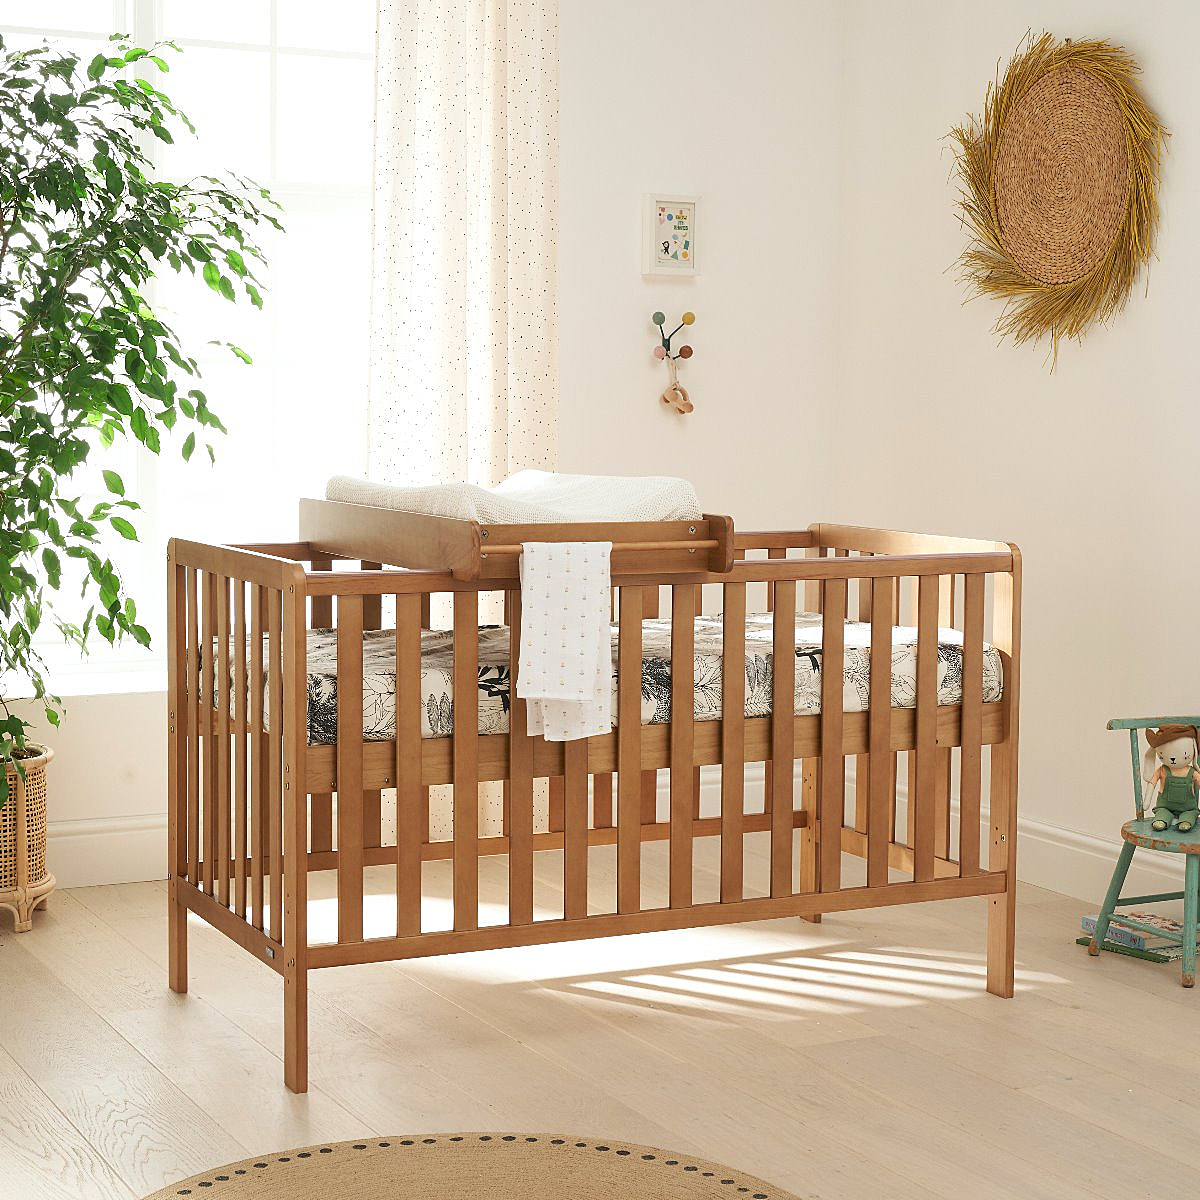 Malmo Cot Bed with Cot Top Changer & Mattress